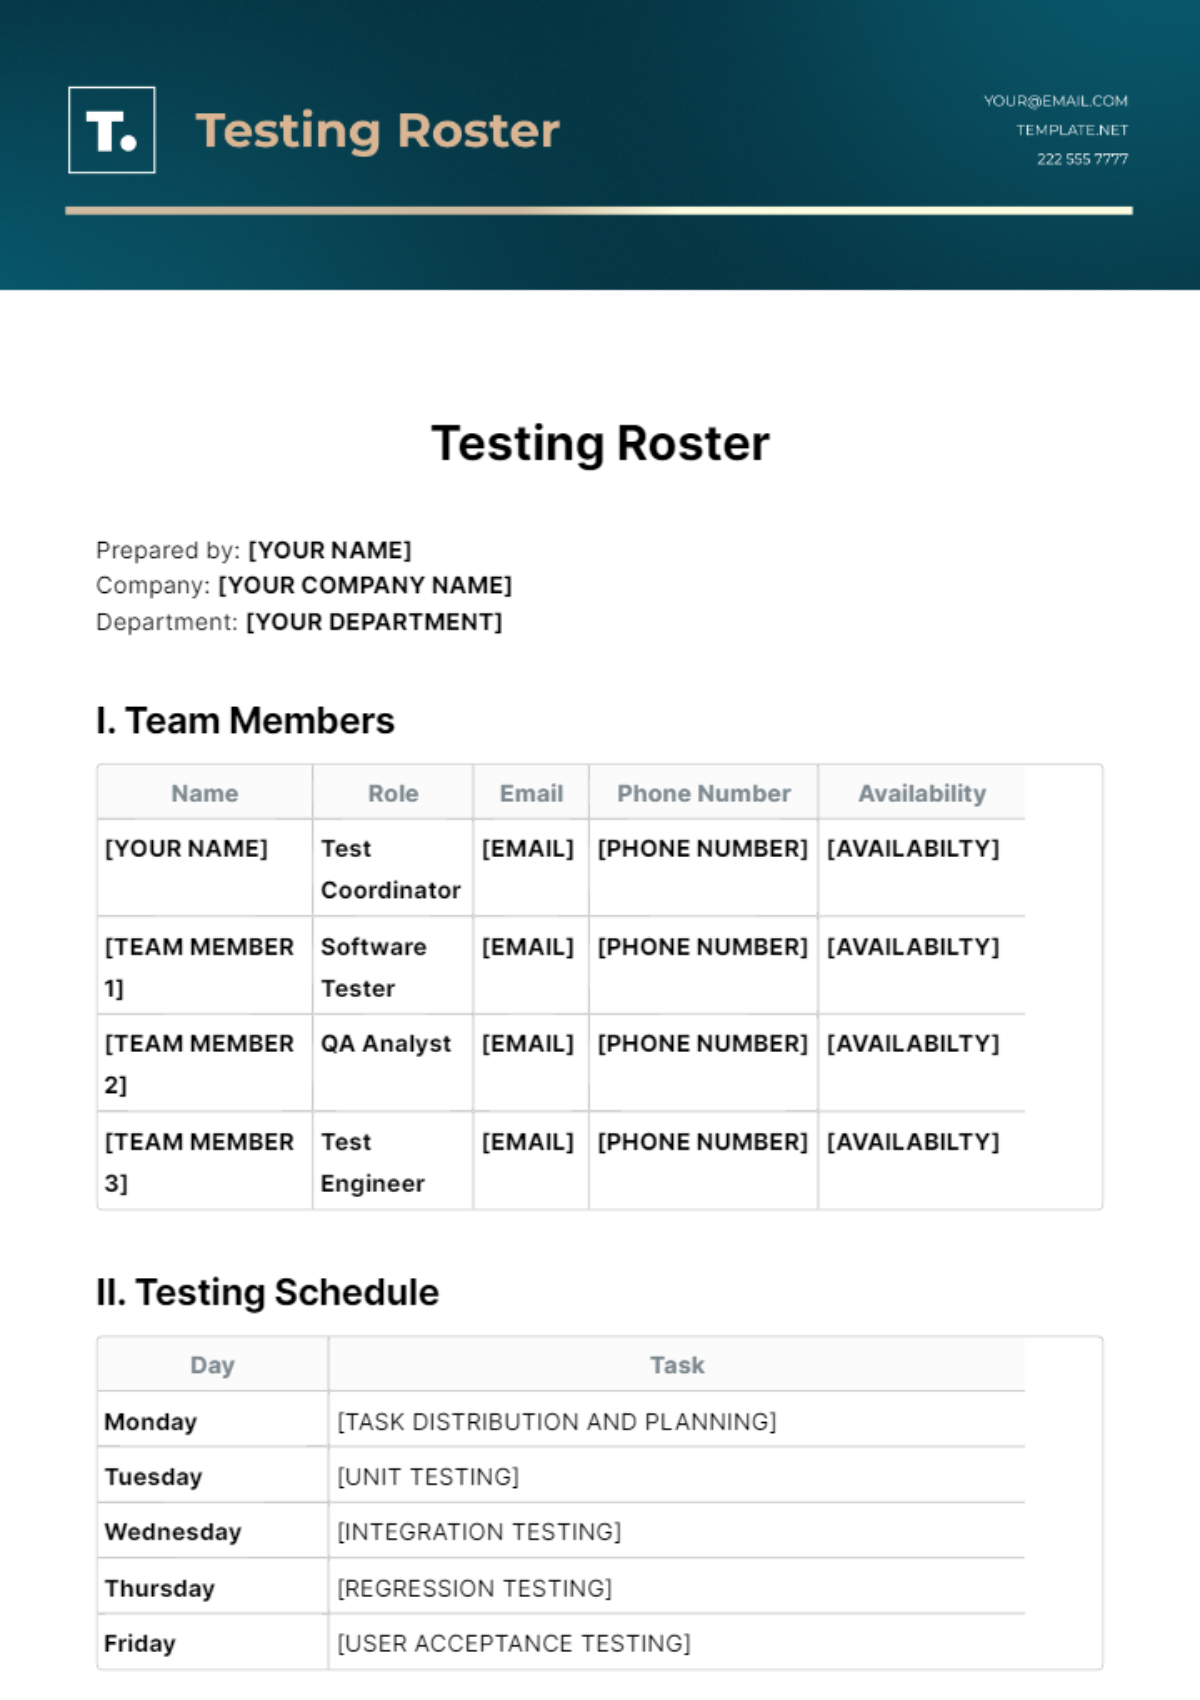 Testing Roster Template